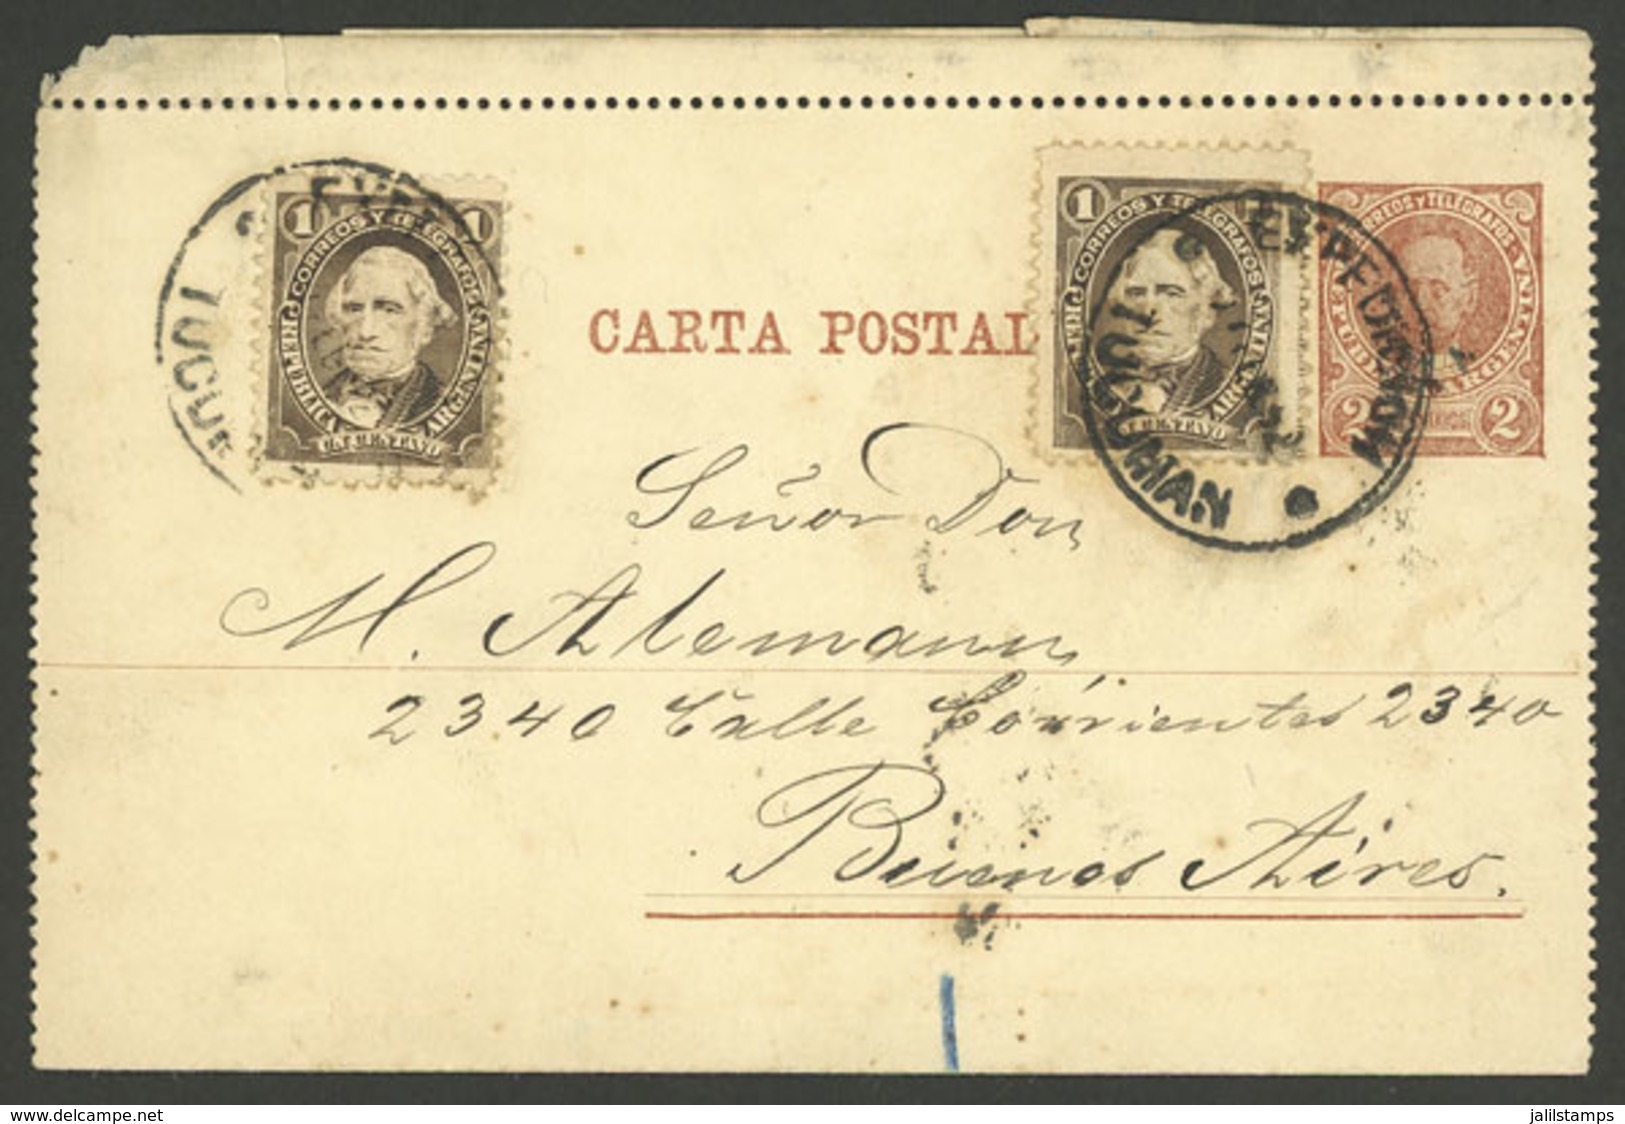 ARGENTINA: 25/FE/1892: Tucumán - Buenos Aires, 2c. Lettercard Uprated With  2x 1c. Vélez Sarsfield (total 4c.), VF Quali - Lettres & Documents